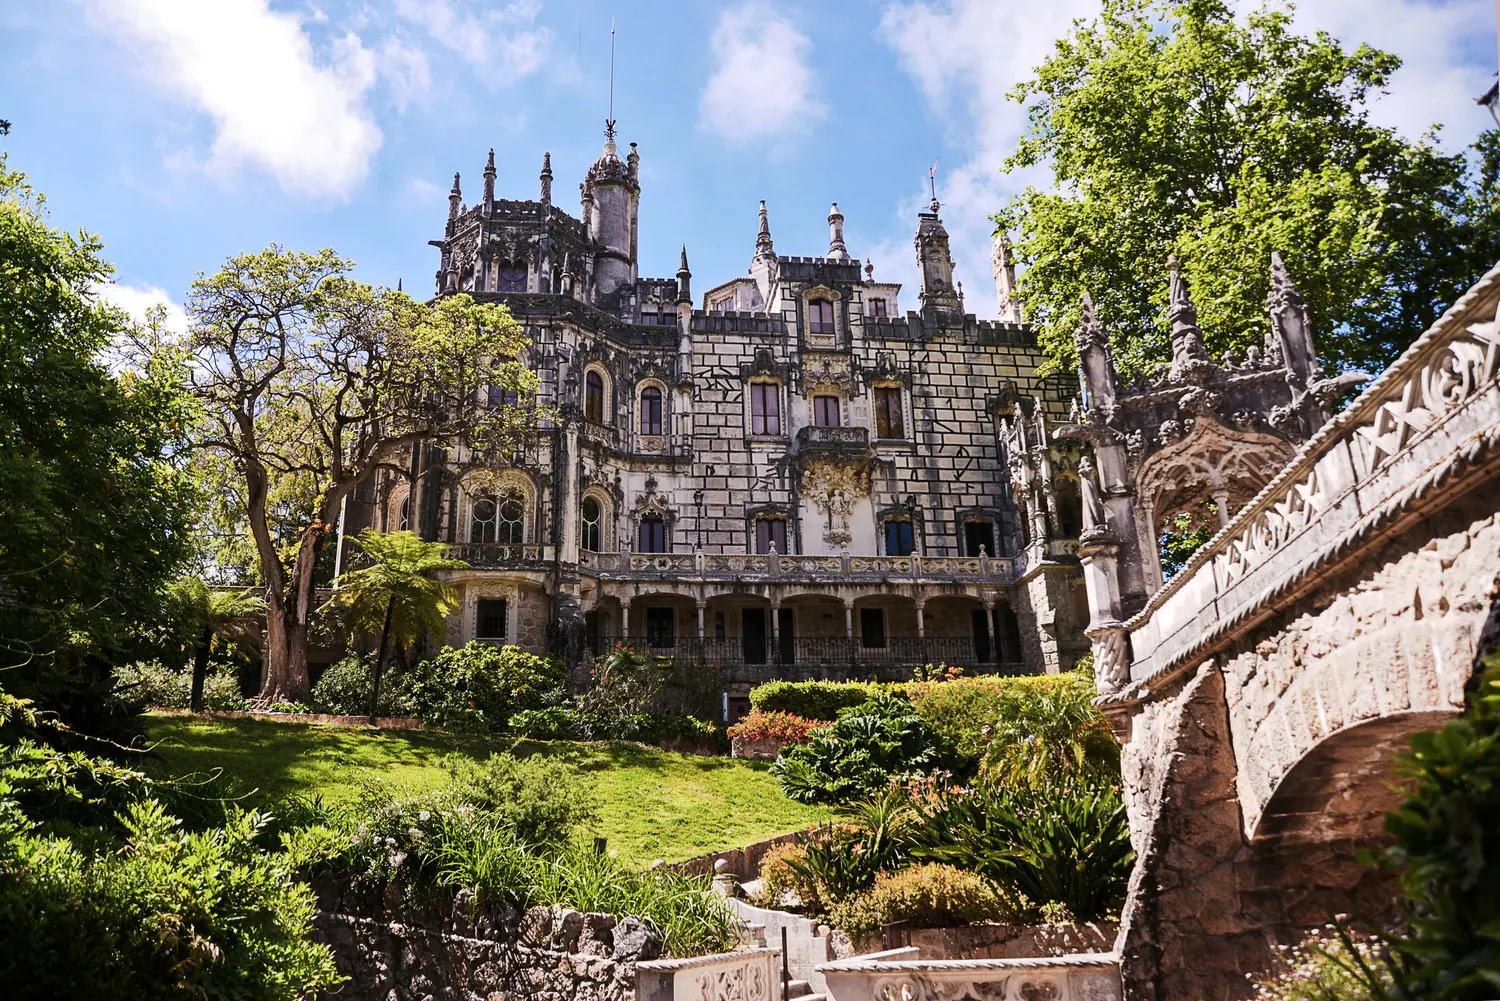 Ornate 19th century Quinta da Regaleira stone palace with spires in Sintra Portugal, surrounded by green gardens.